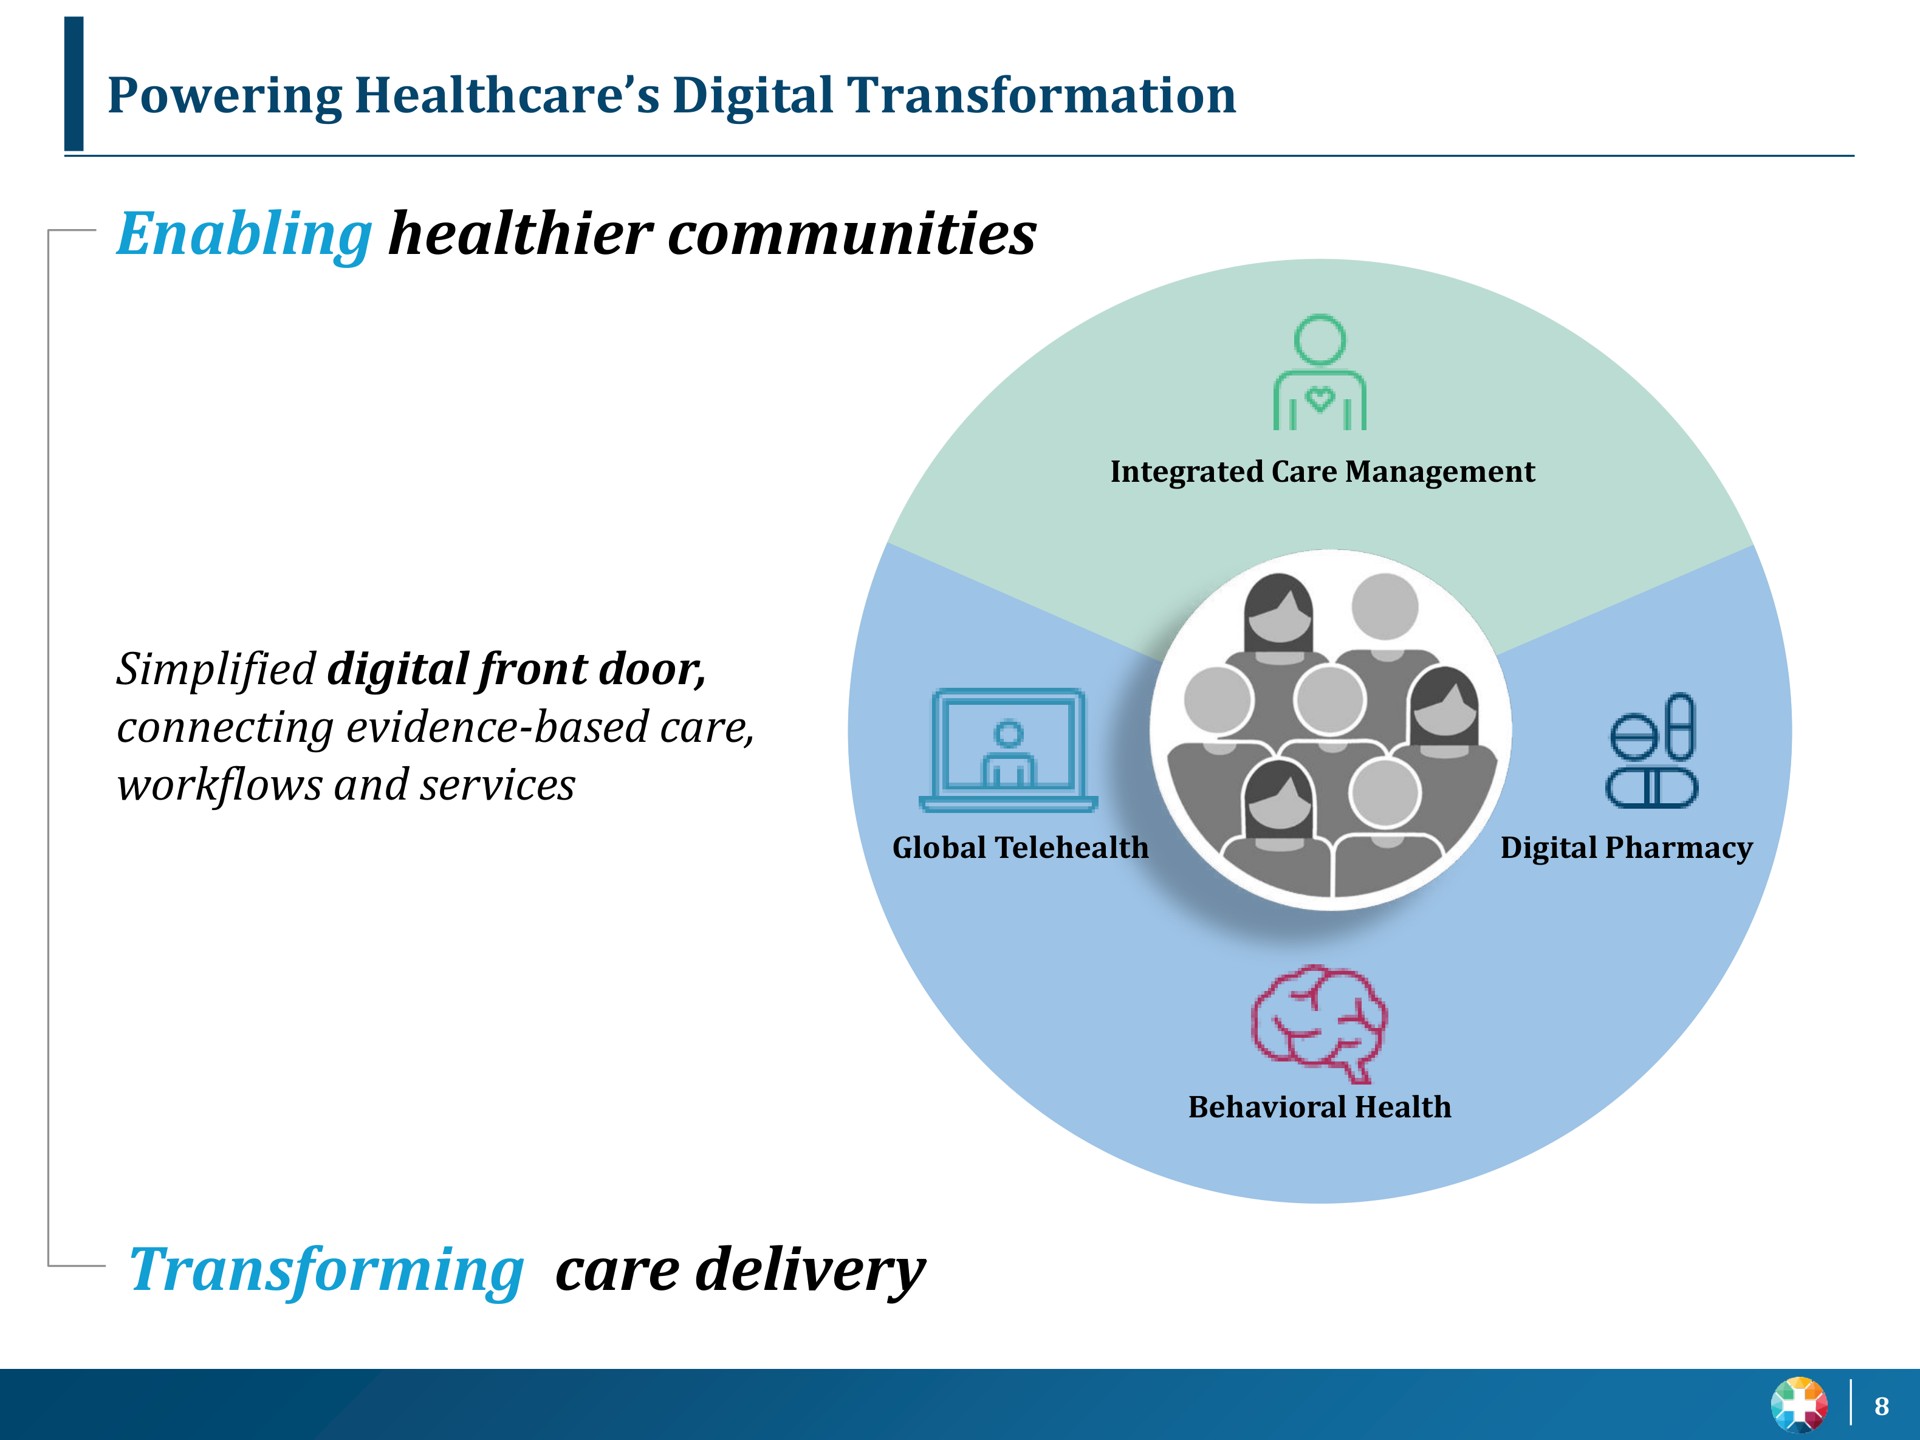 powering digital transformation enabling communities simplified digital front door connecting evidence based care and services transforming care delivery lye a | UpHealth